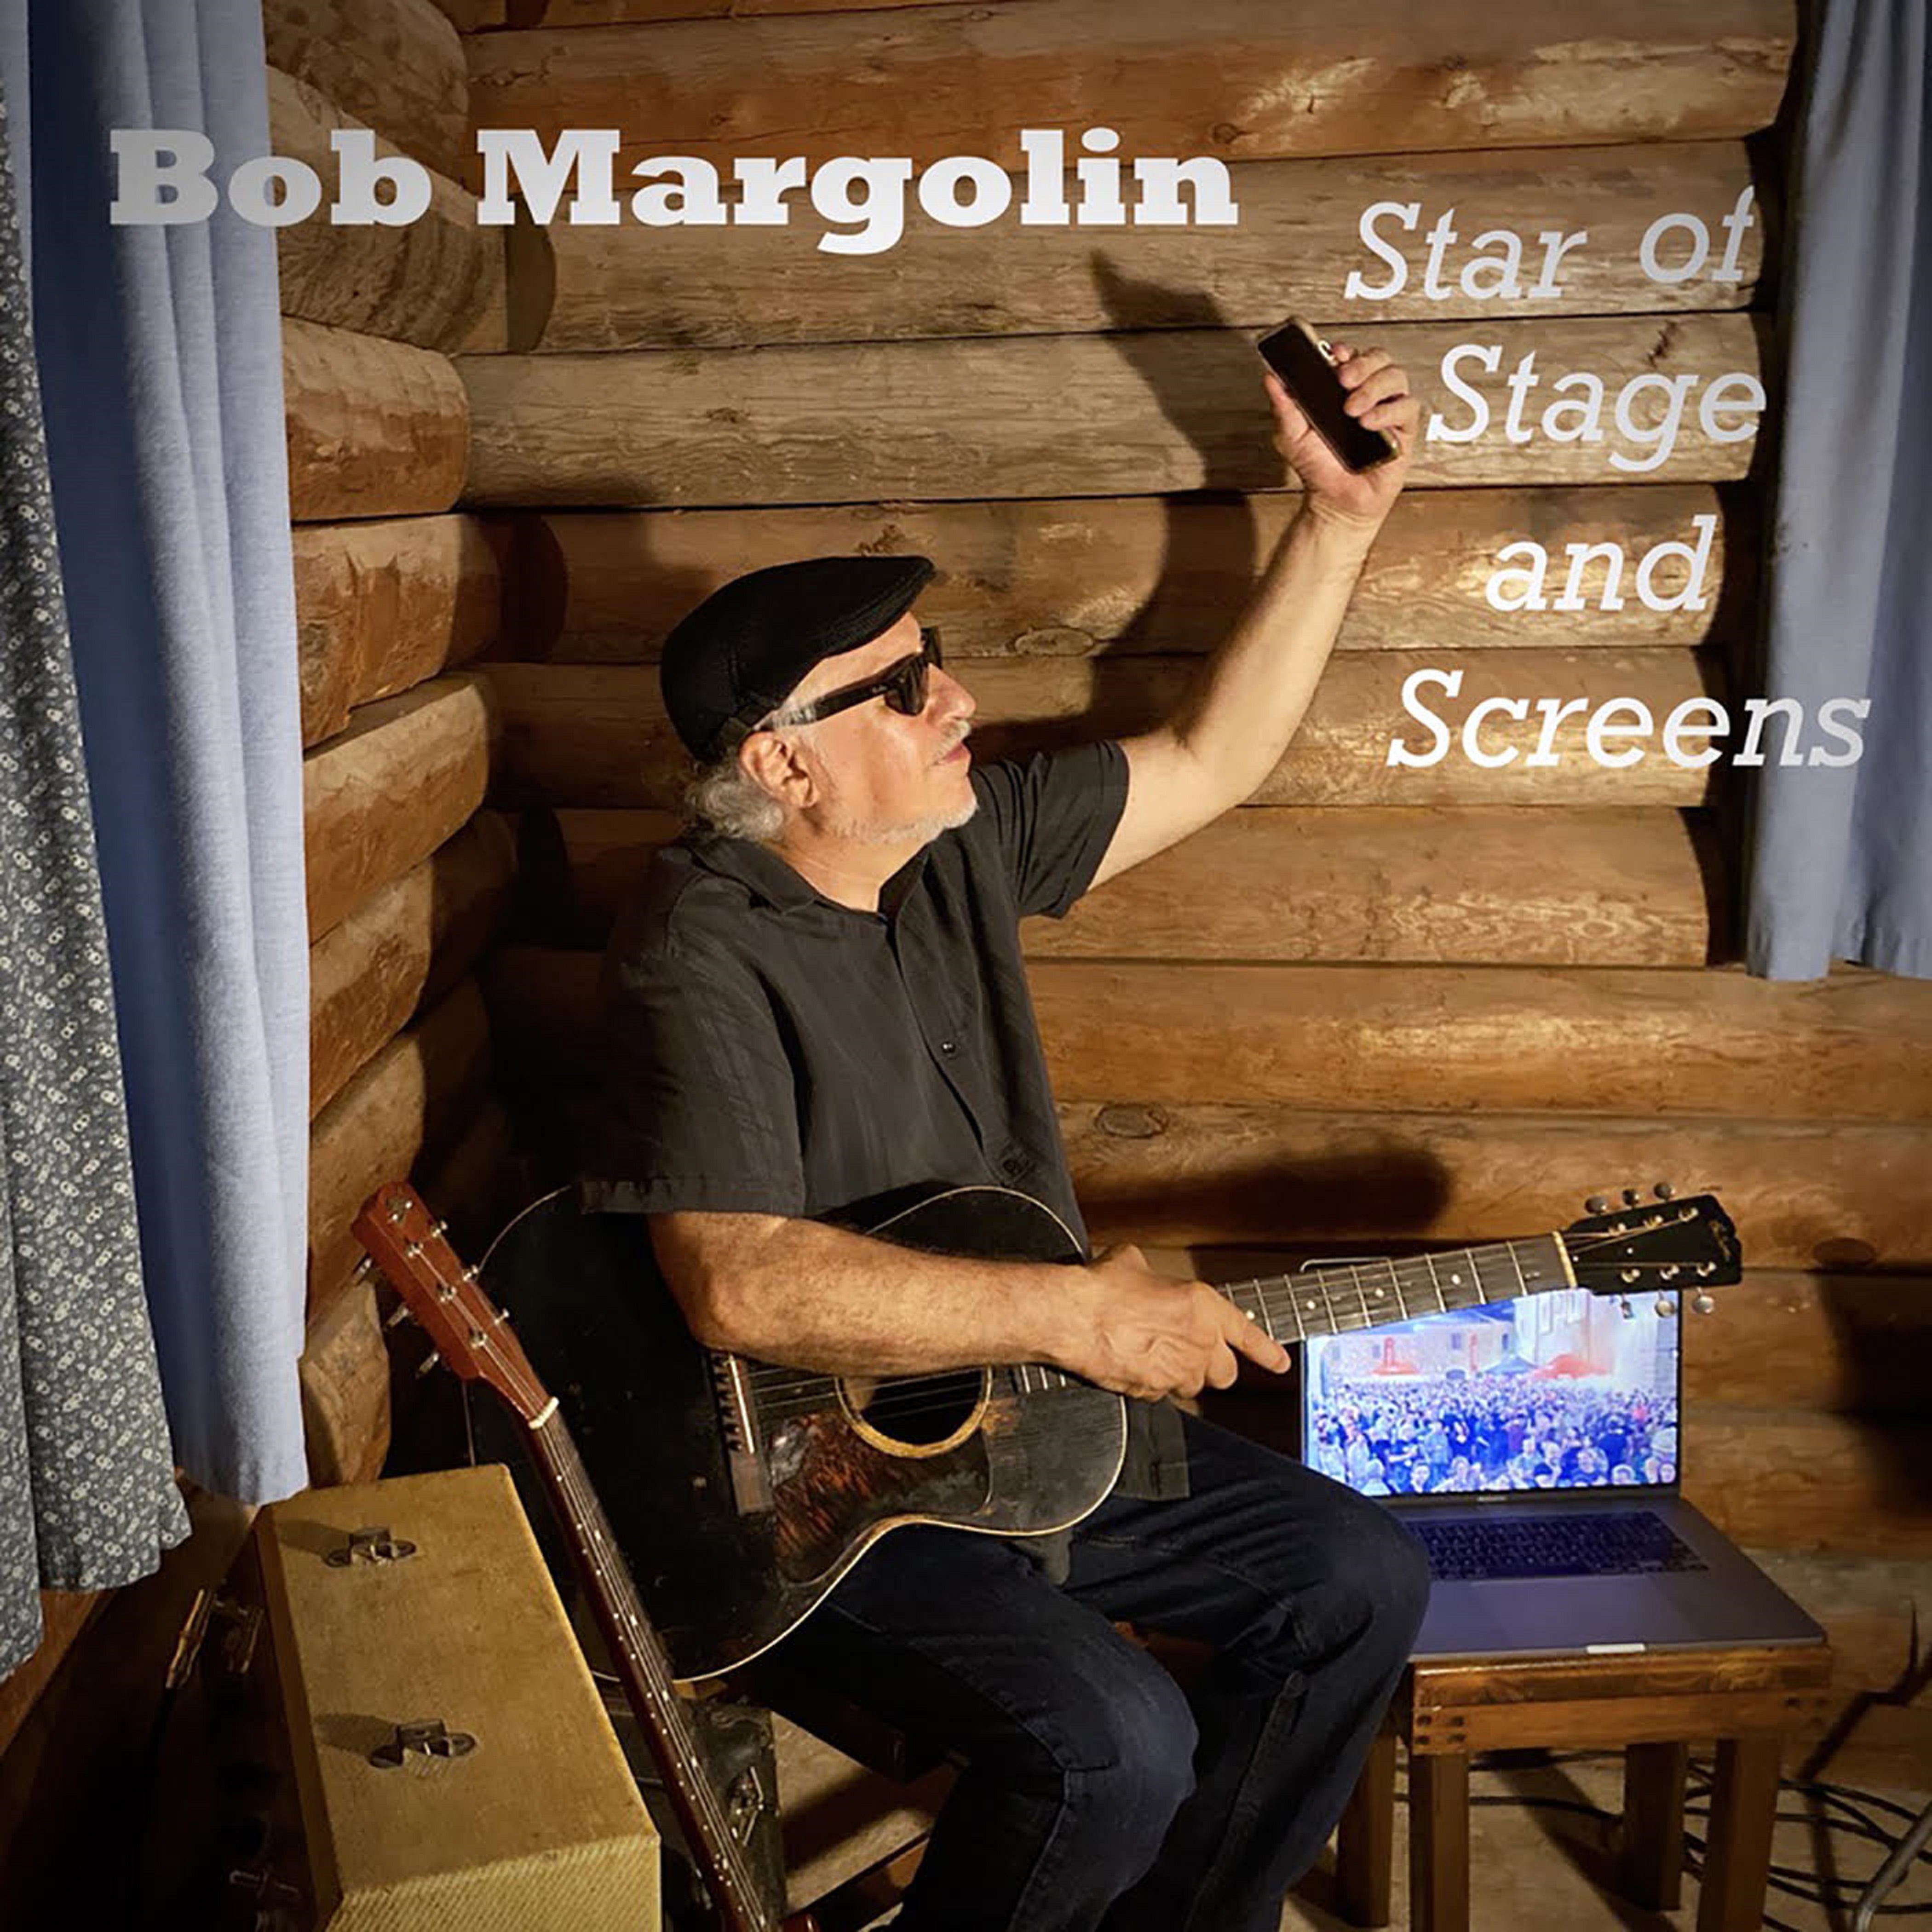 Bob Margolin's "Star of Stage and Screens" Available Now